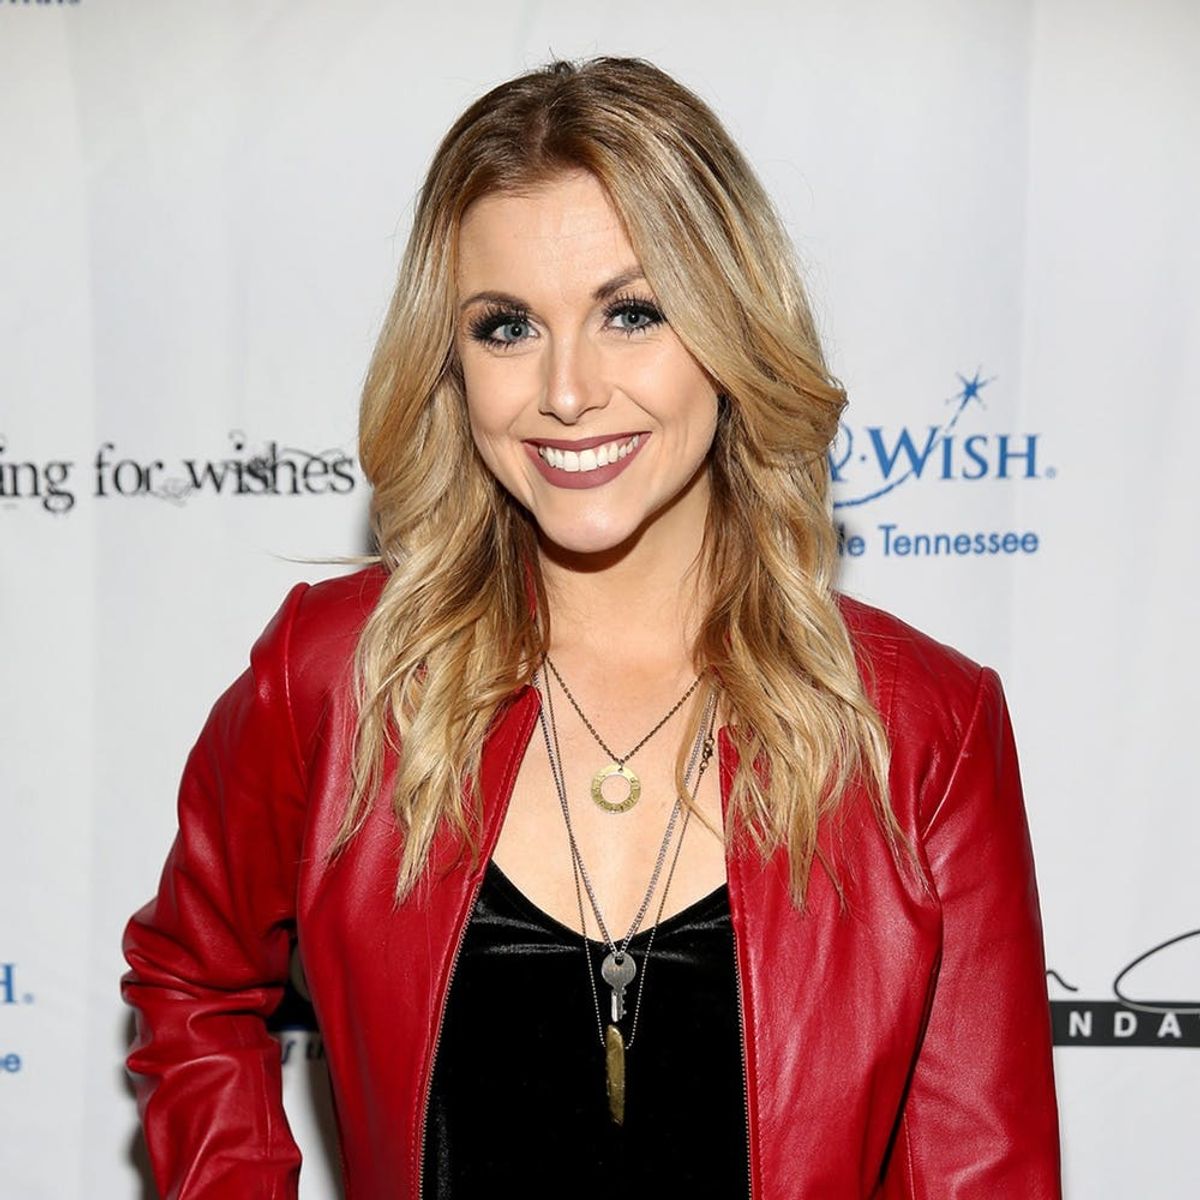 Meet Lindsay Ell, the Guitar-Playing Gal Taking Over Country Music